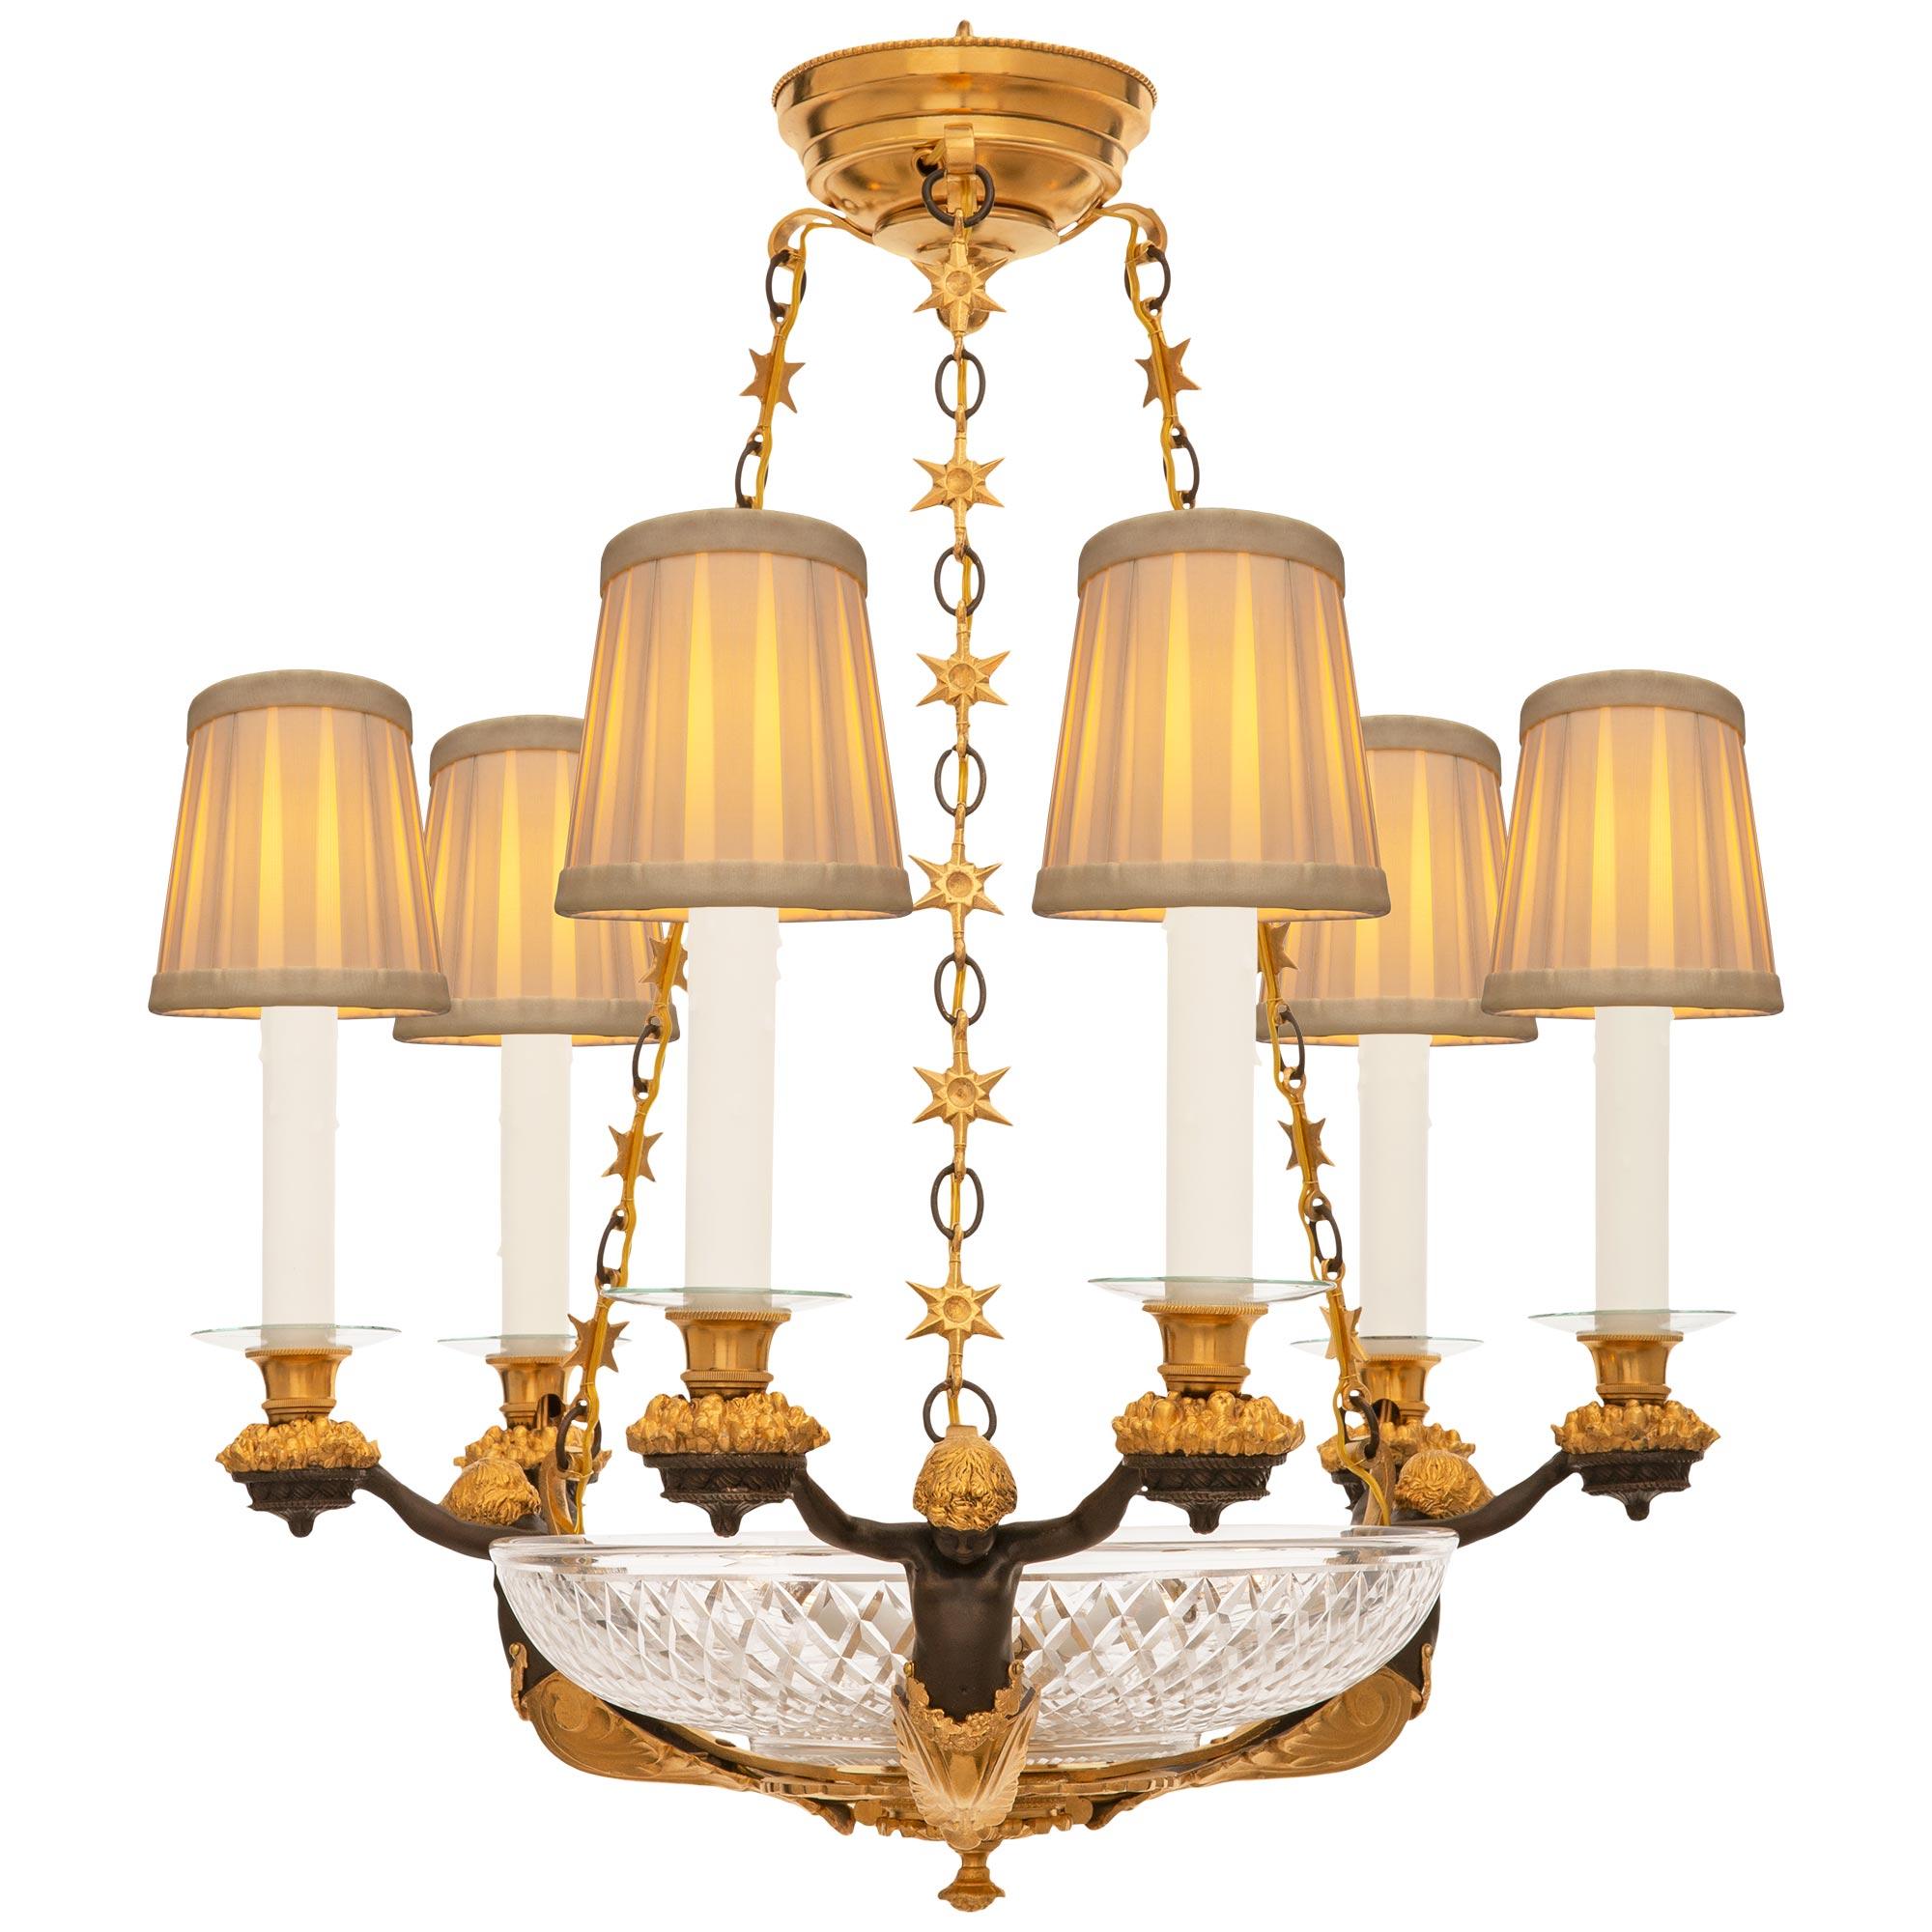 French 19th Century Neo-Classical St. Bronze, Ormolu & Glass Chandelier For Sale 4